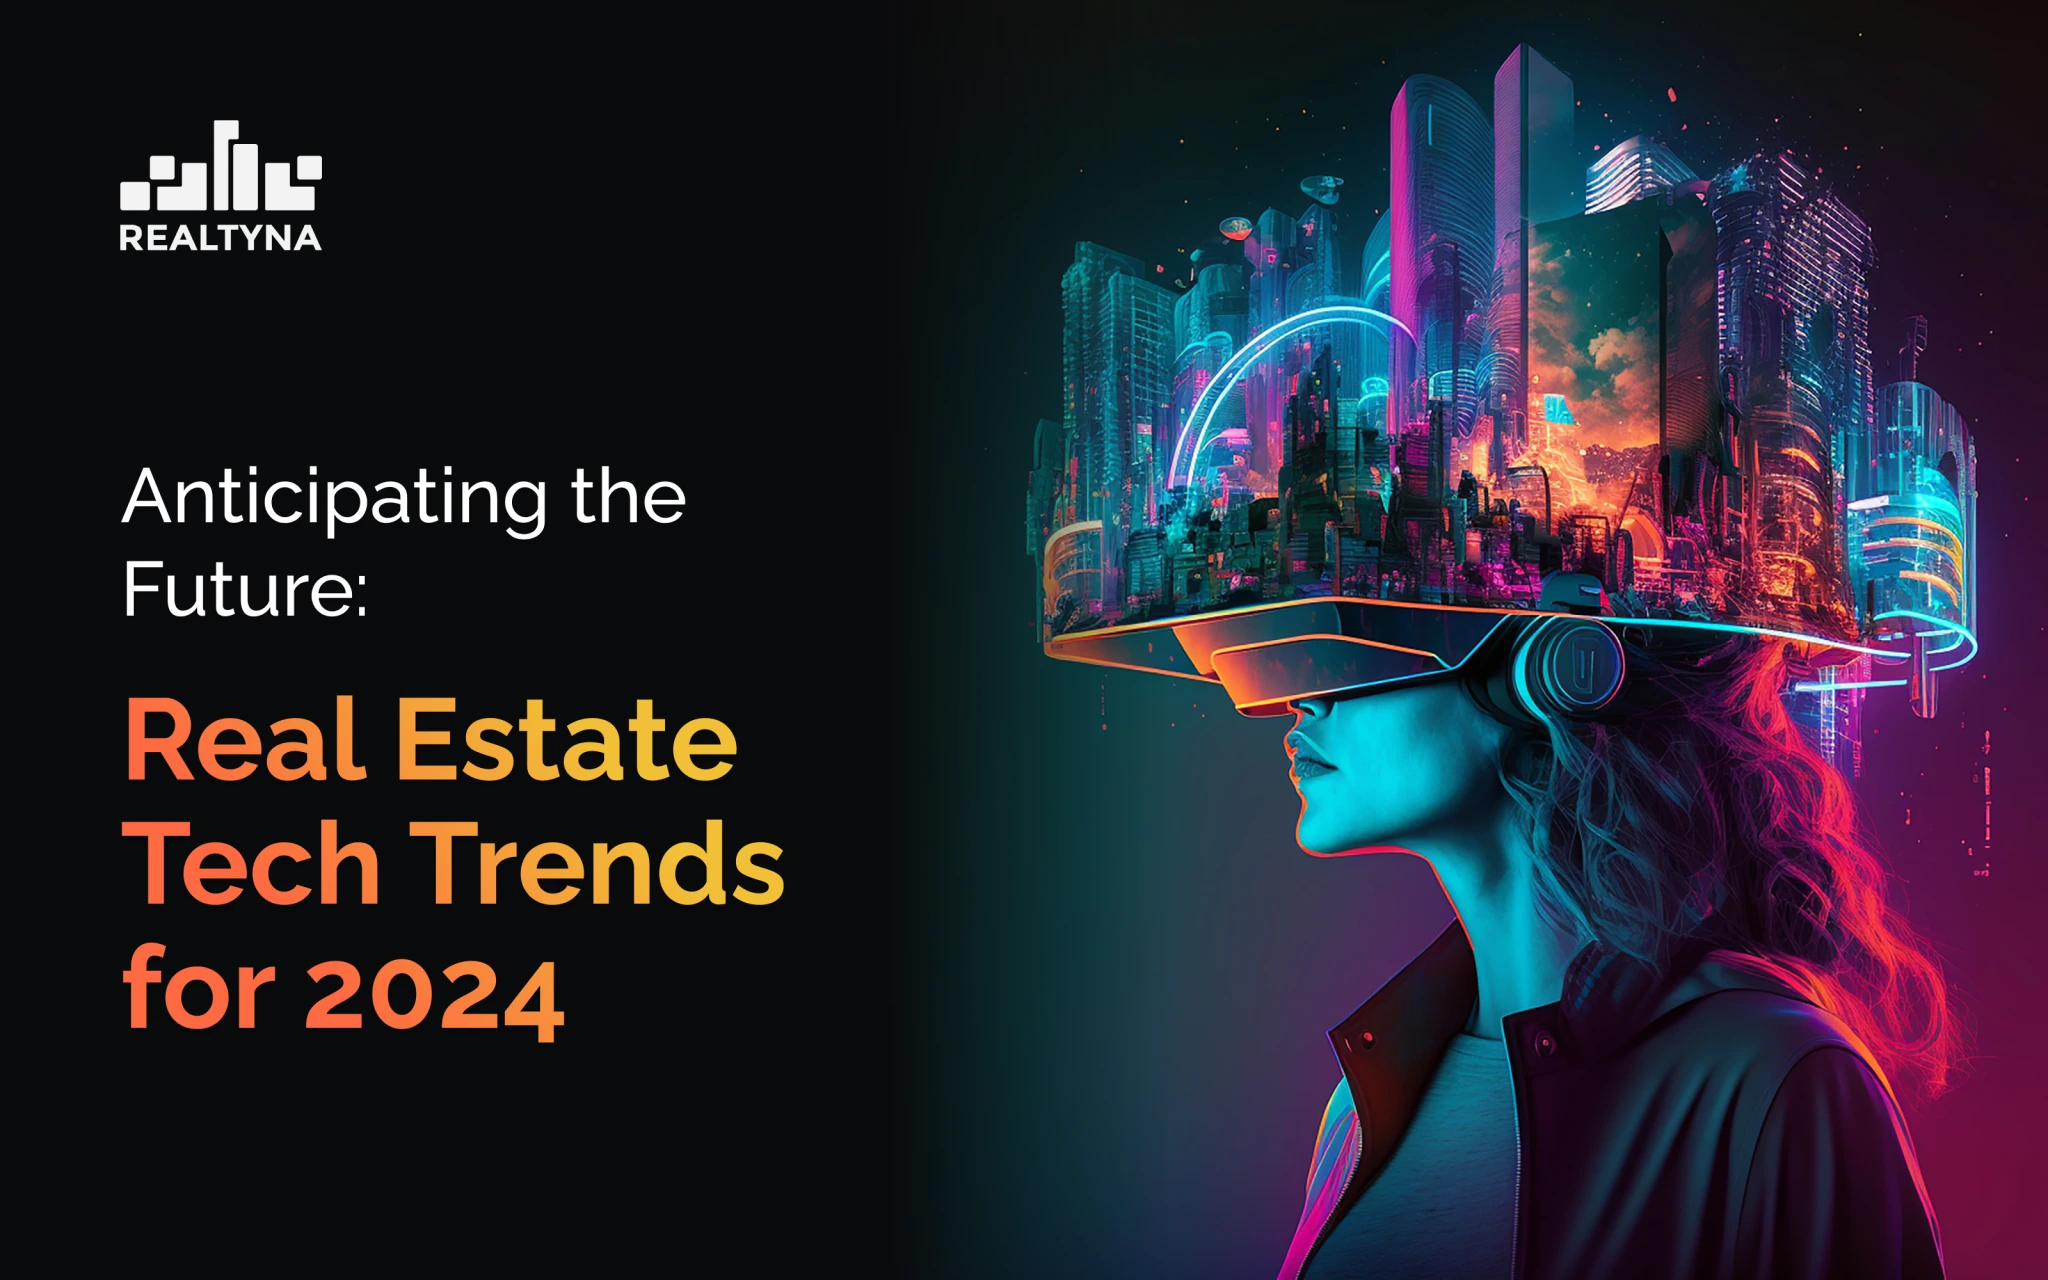 Real Estate Tech Trends for 2024